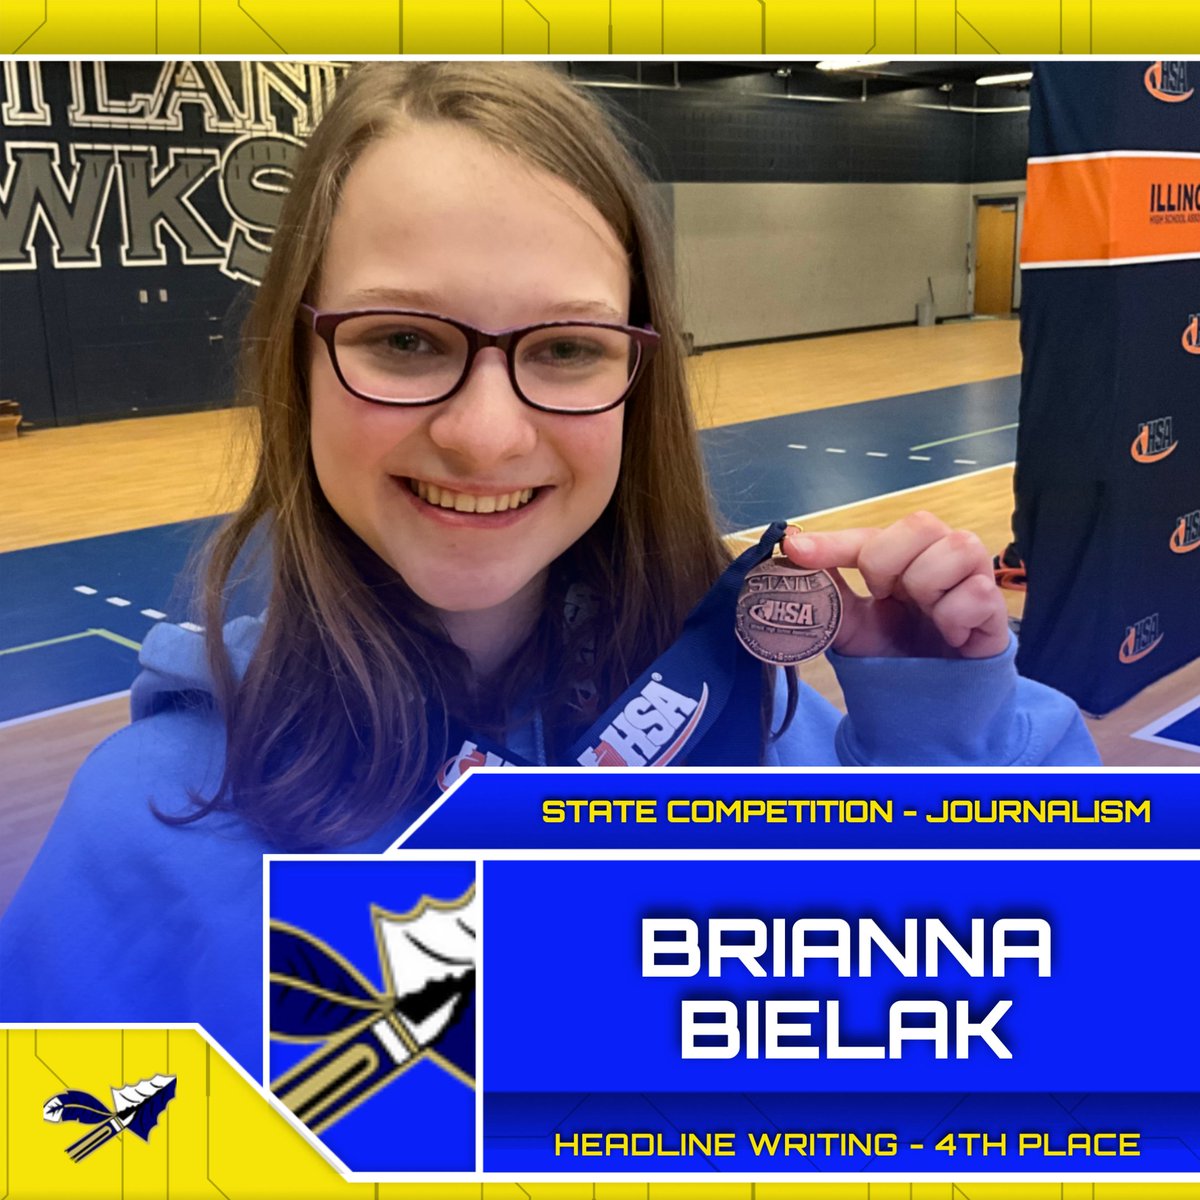 Congratulations to Brianna Bielak for earning 4th Place in Headline Writing at the state competition in journalism! She is the first student in the history of Crete-Monee High School to accomplish this! #GoWarriors